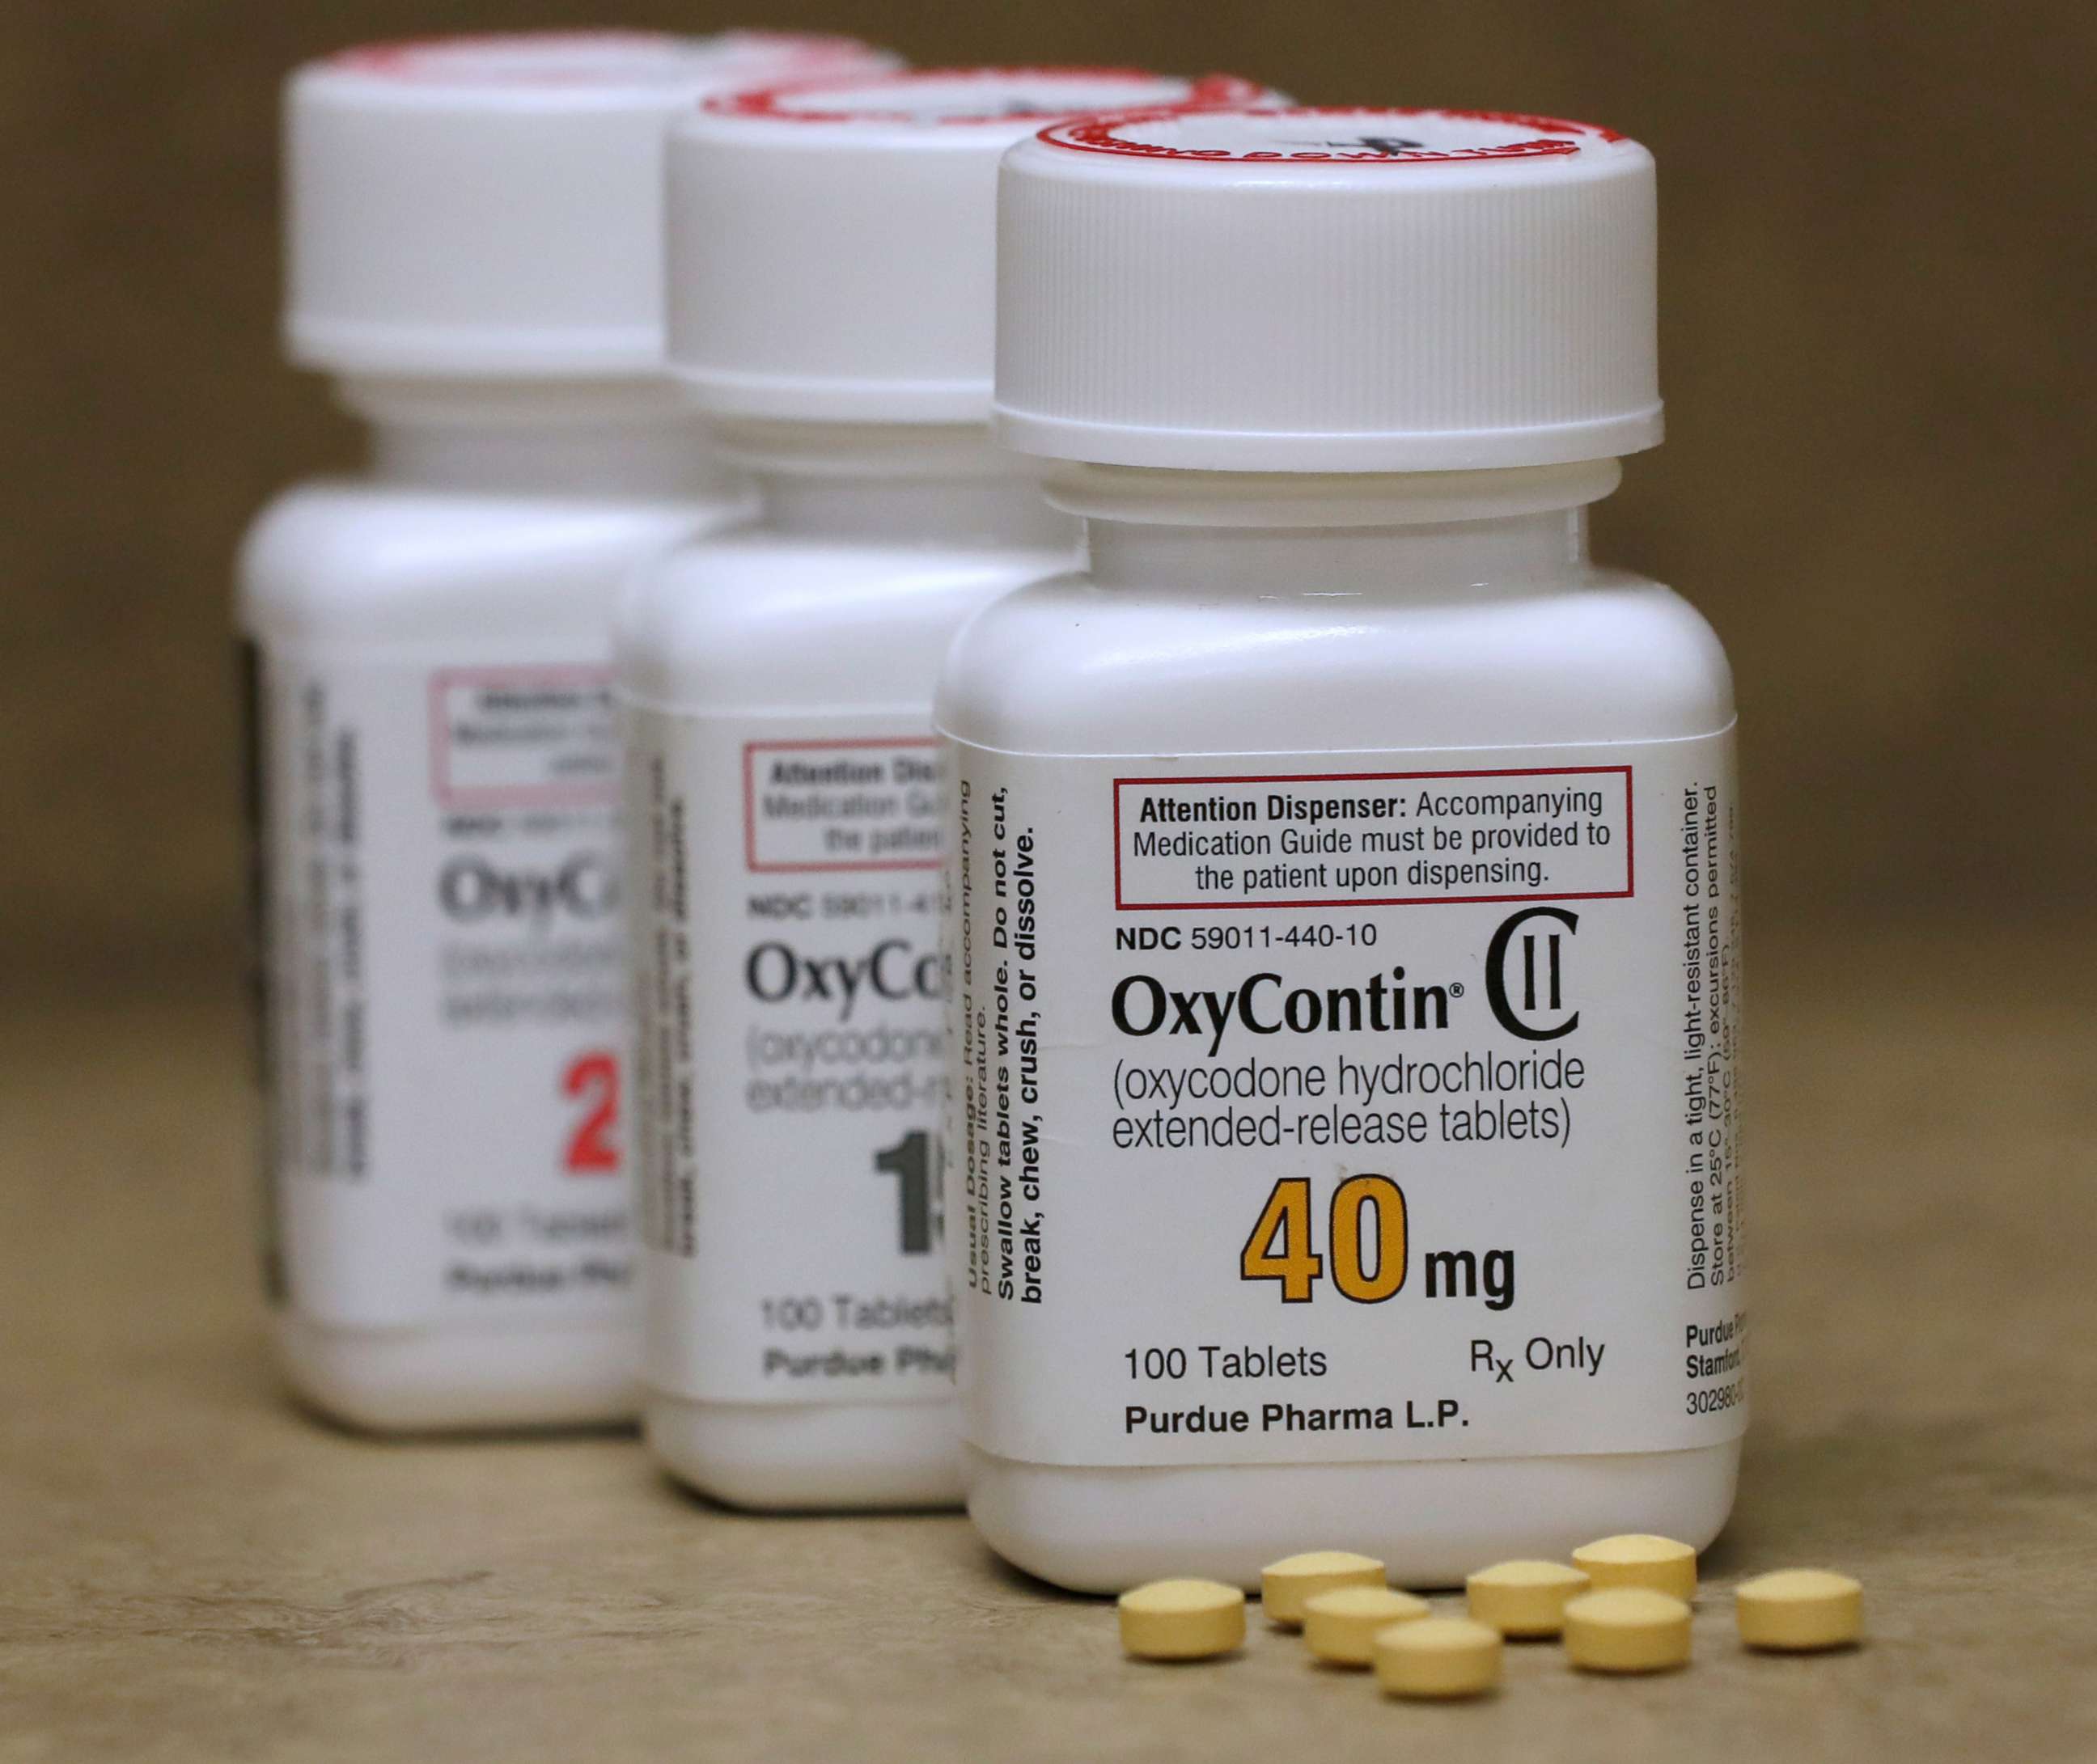 PHOTO: Bottles of prescription painkiller OxyContin pills, made by Purdue Pharma LP, sit on a counter at a local pharmacy in Provo, Utah, U.S., in this April 25, 2017 file photo.